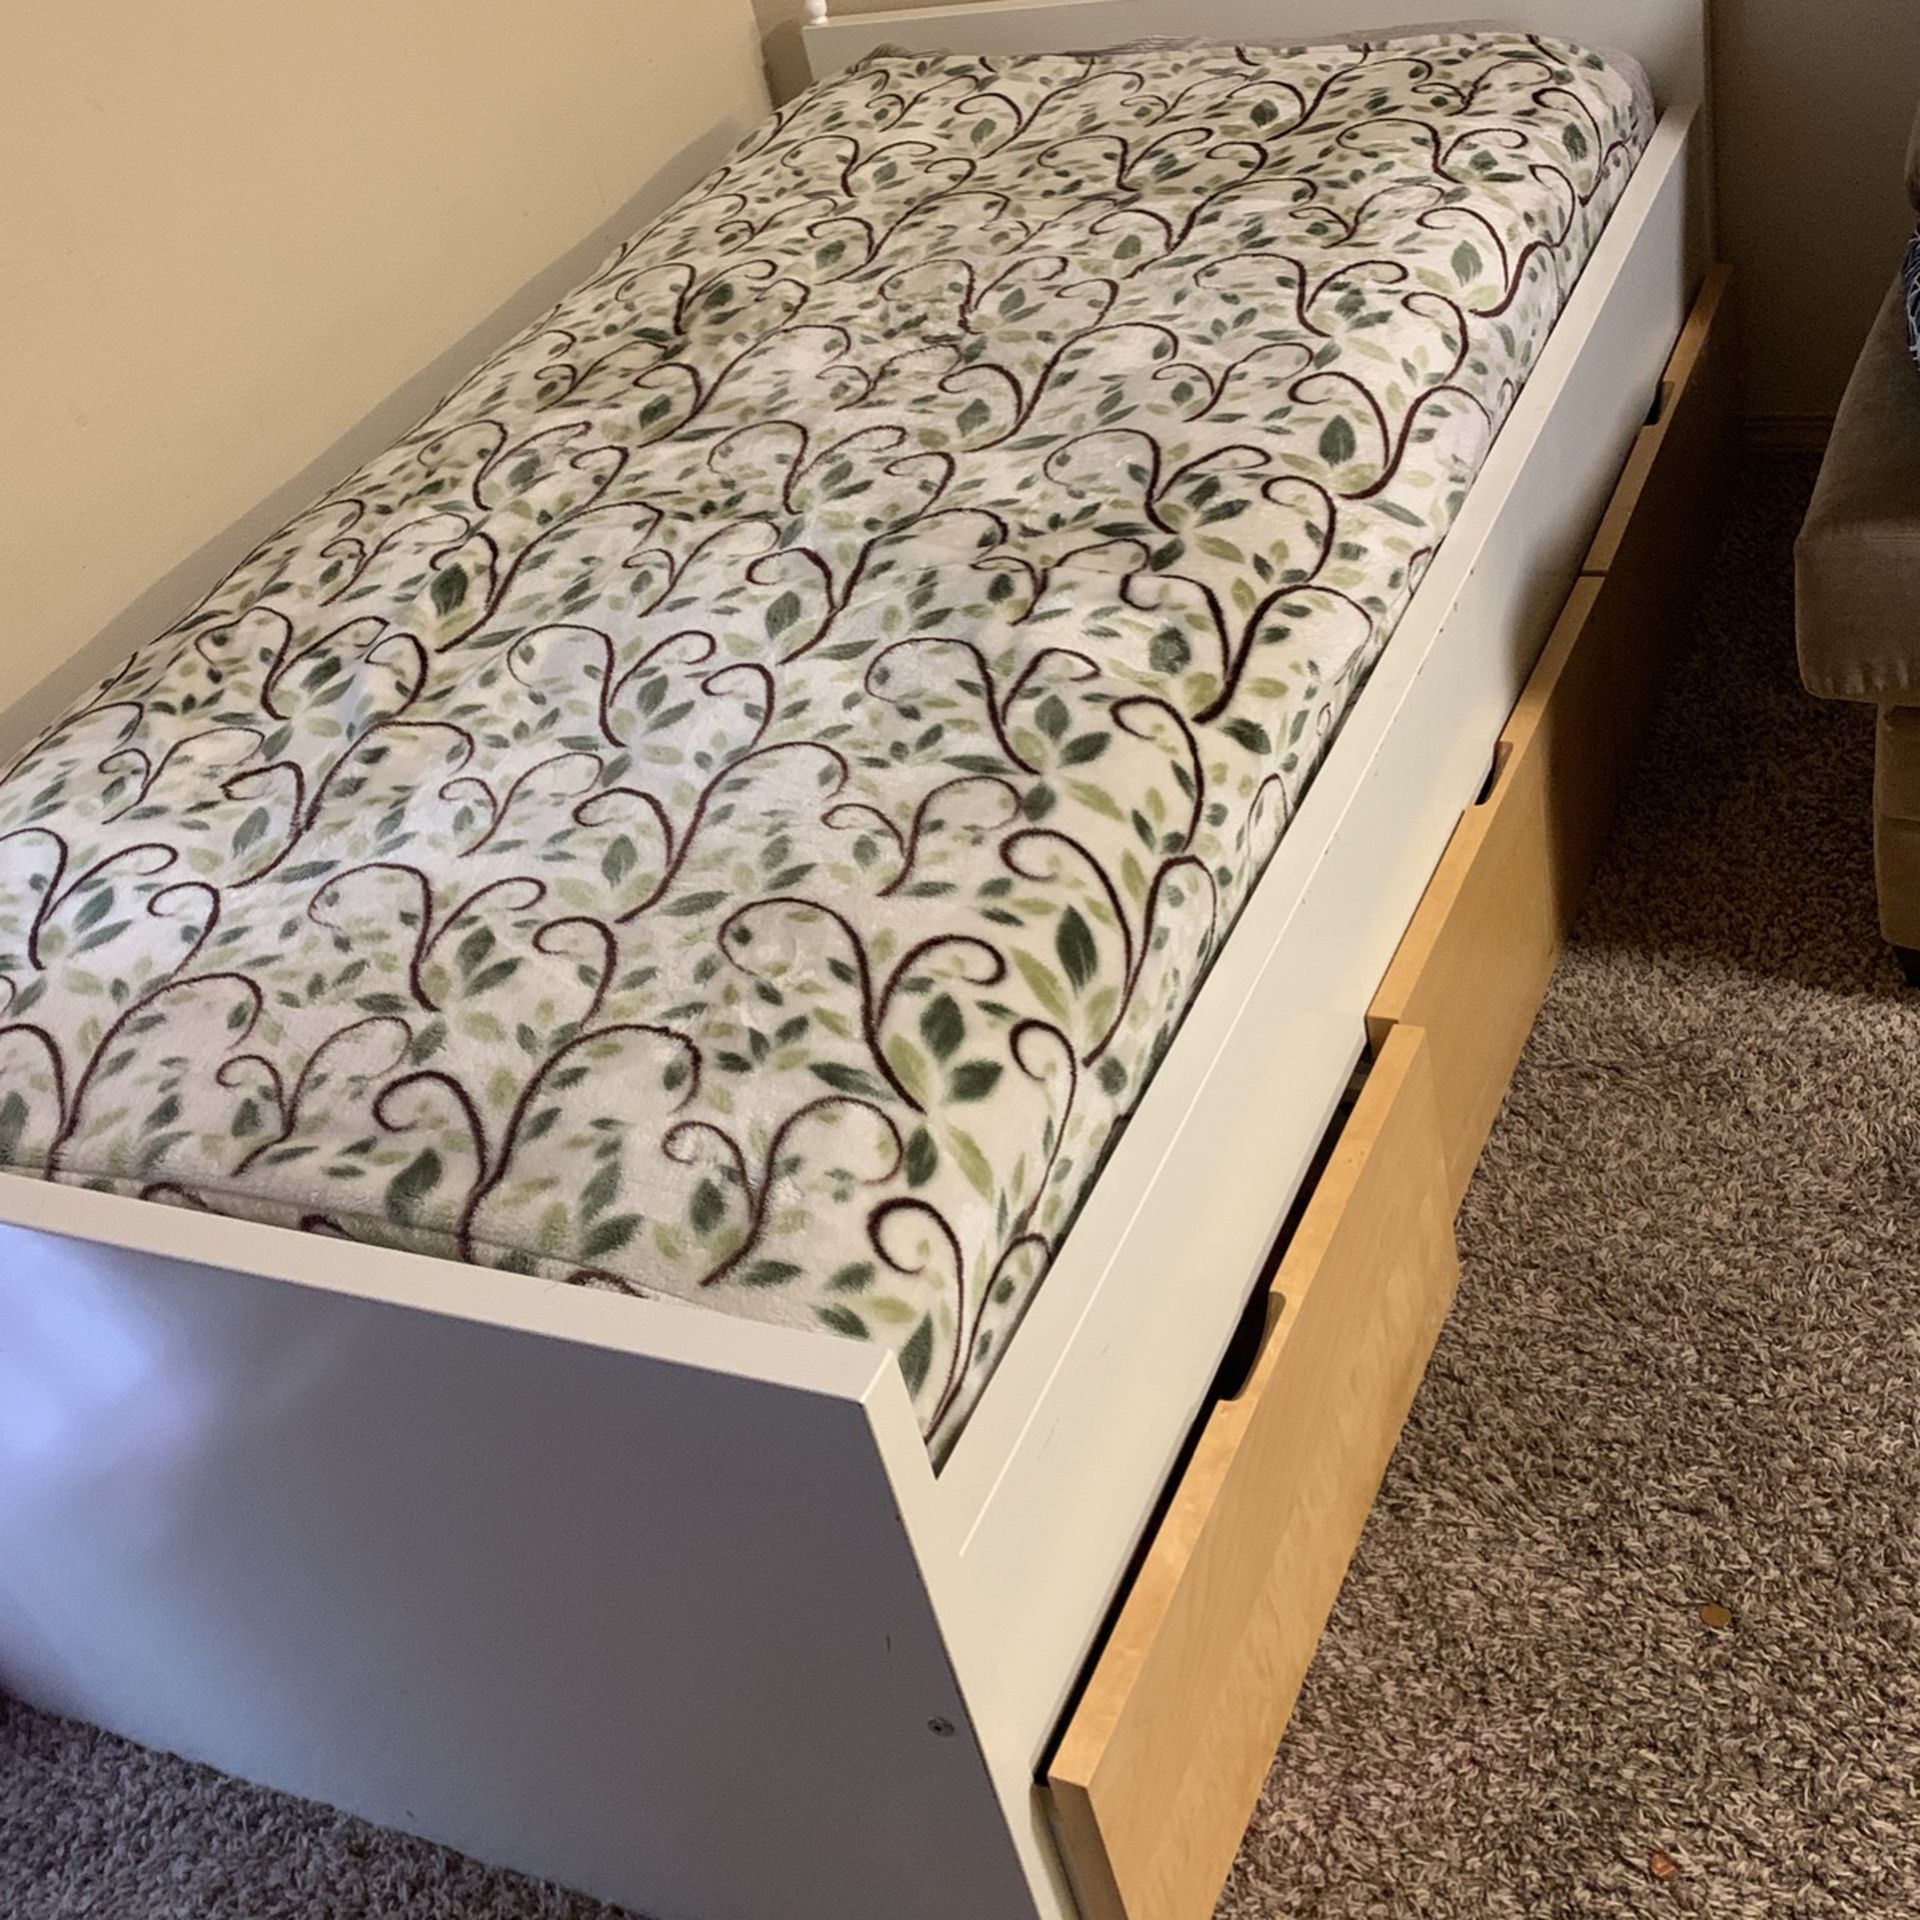 super bed.  cleans good base and mattress conditions